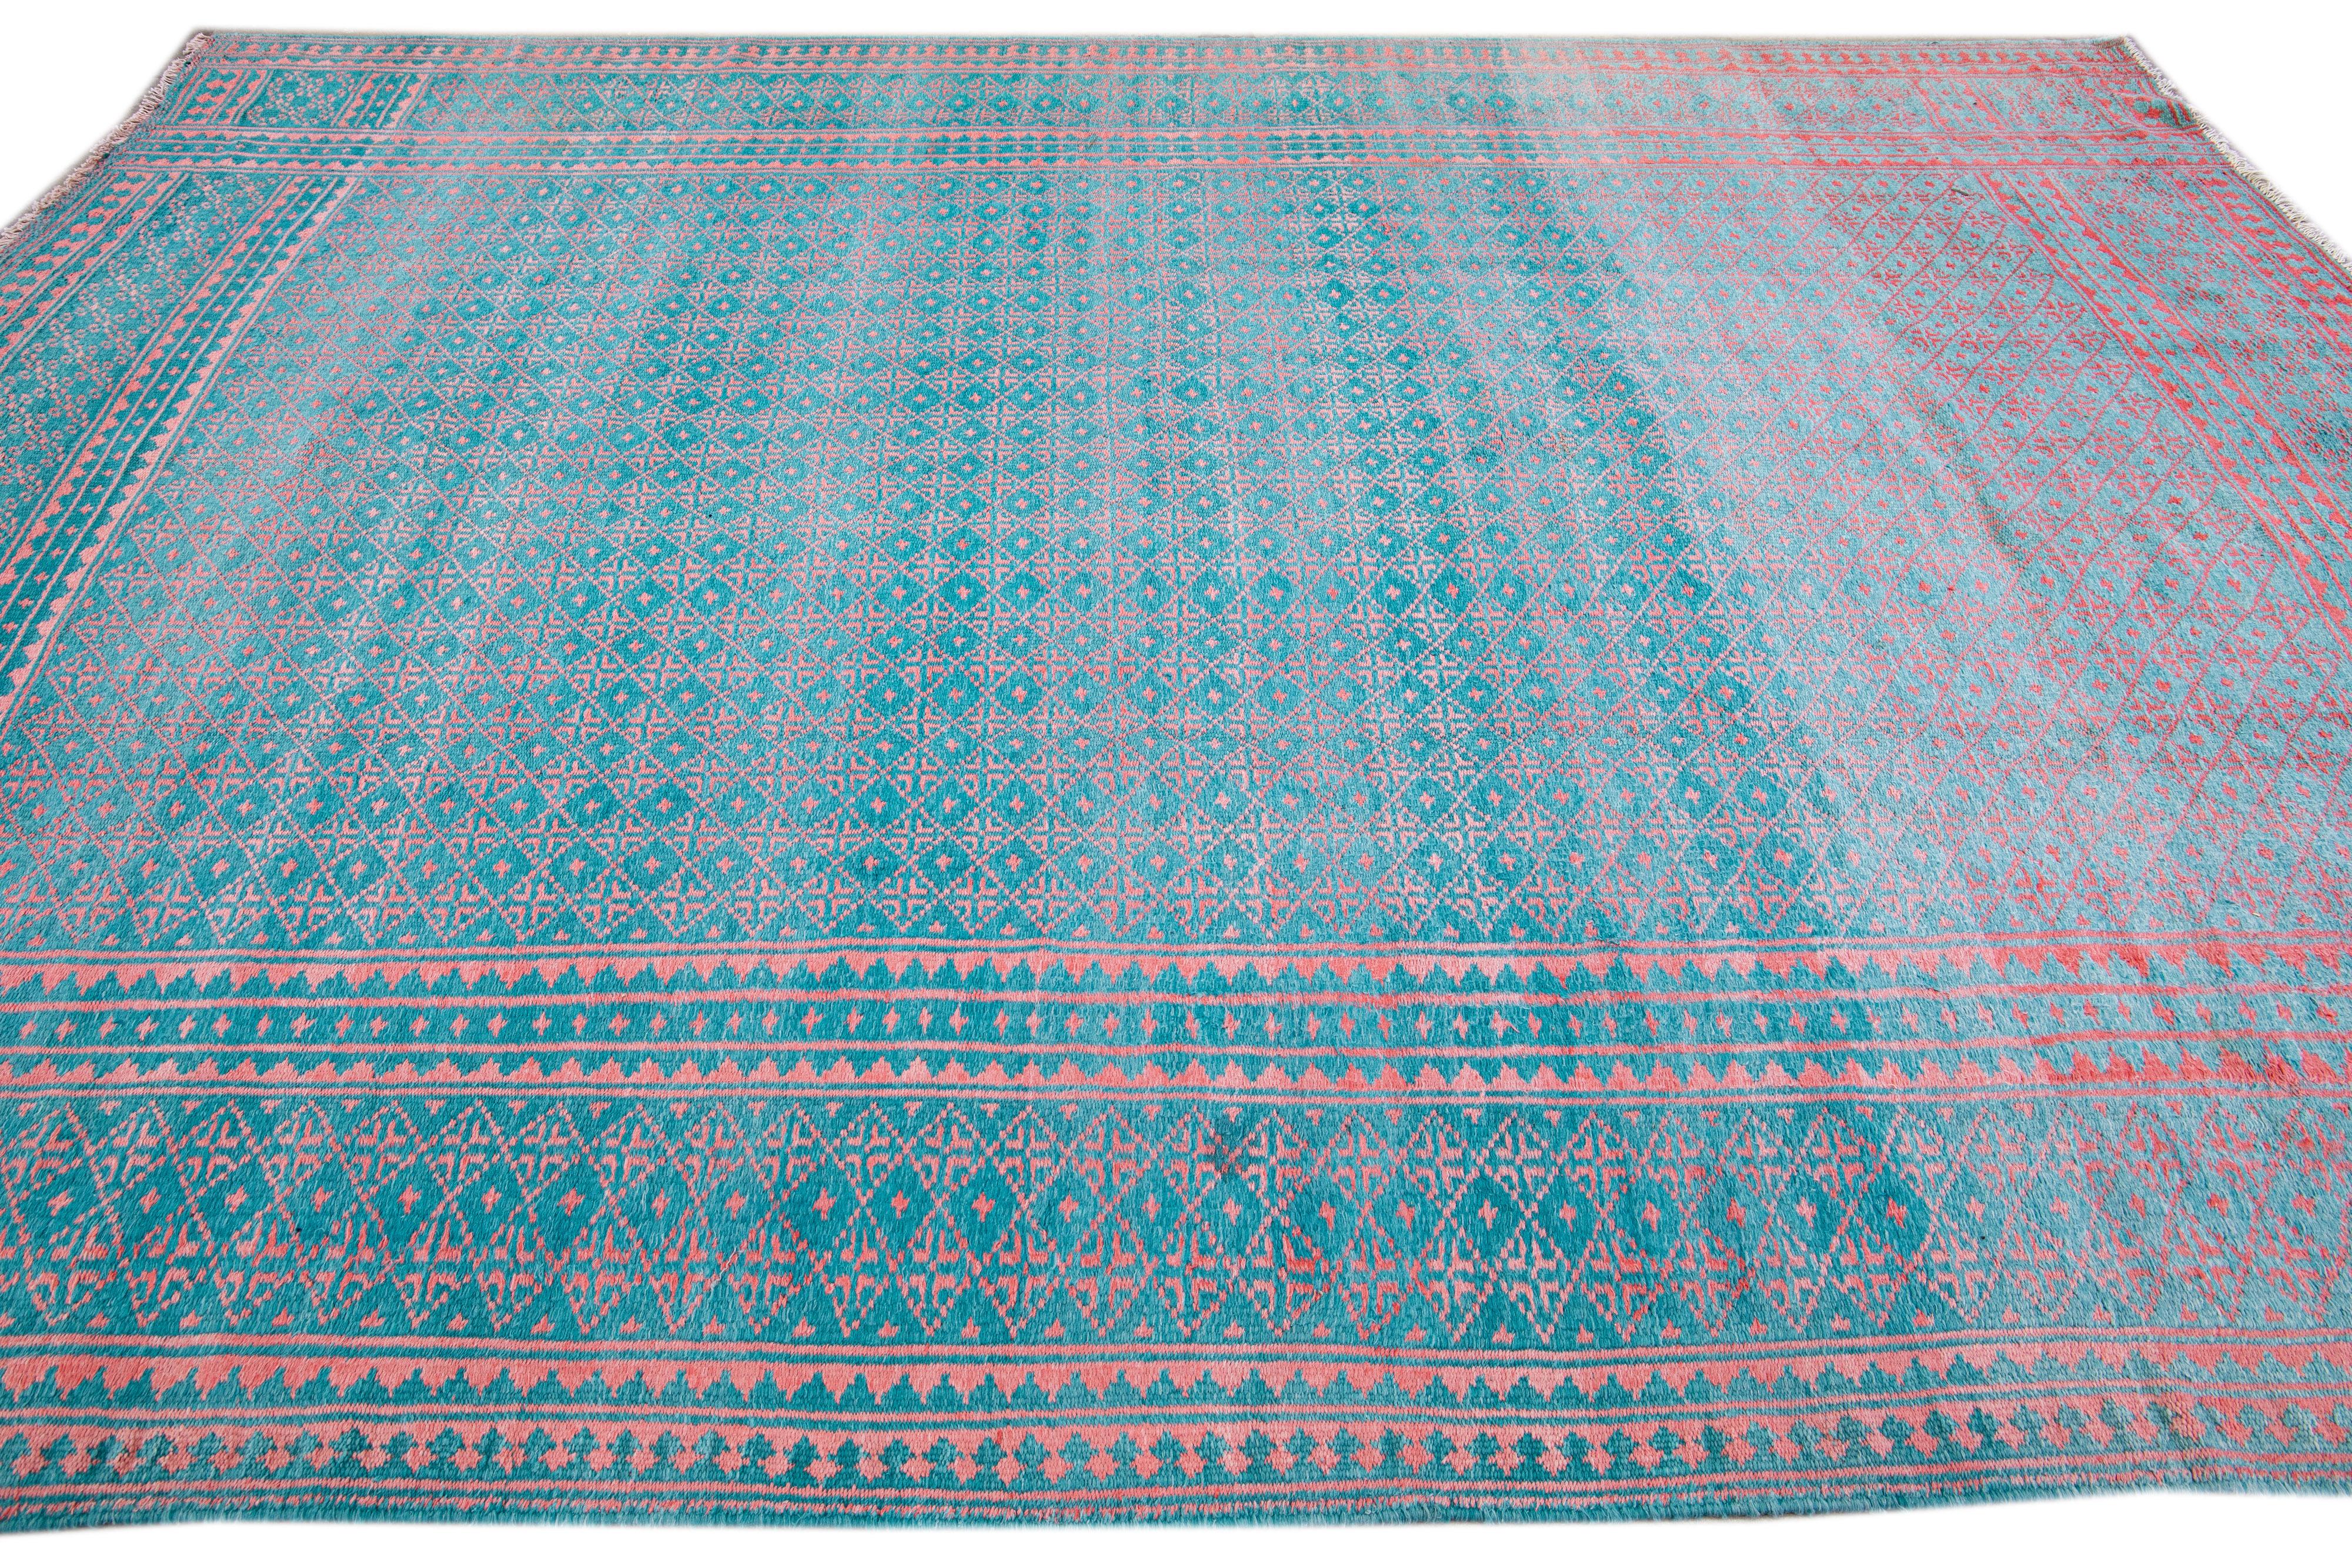 Vintage Indian Handmade Geometric Pattern Turquoise Wool & Cotton Rug In Excellent Condition For Sale In Norwalk, CT